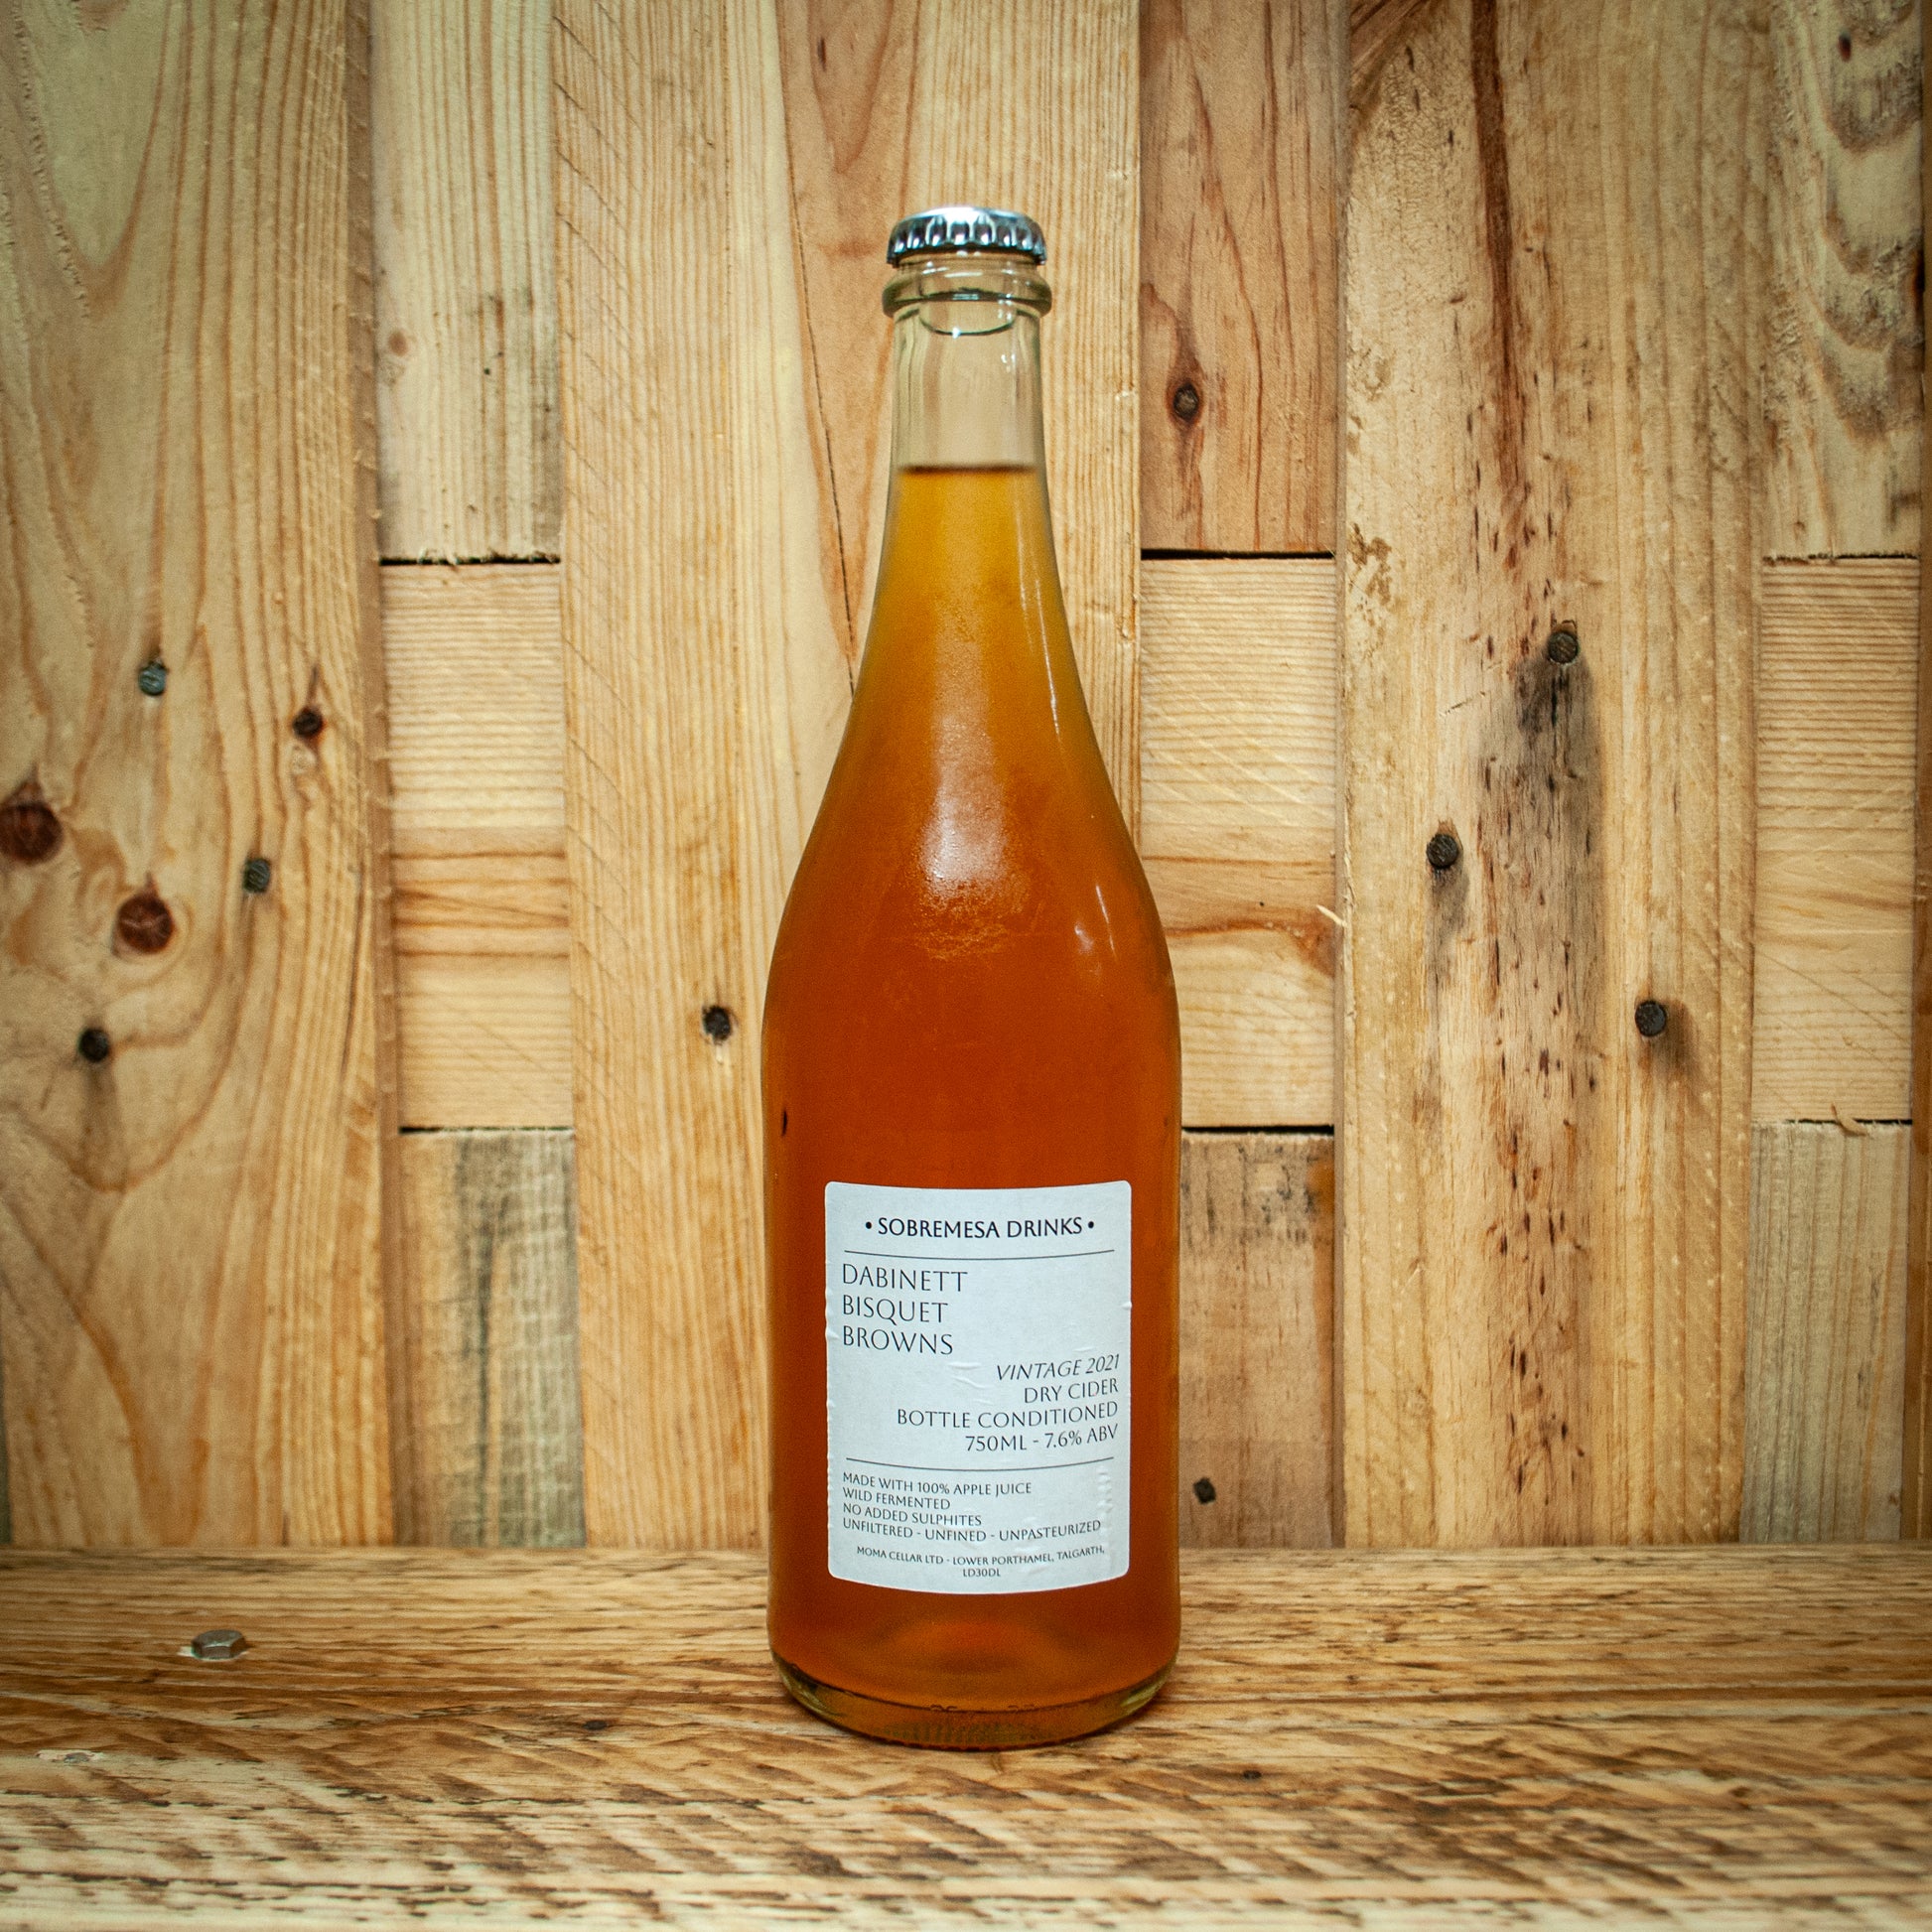 Vintage 2021 Brisquet - Browns - Dabinett Natural Cider available at Essex Spirits Co. online shop and The Essex Distillery, Chelmsford